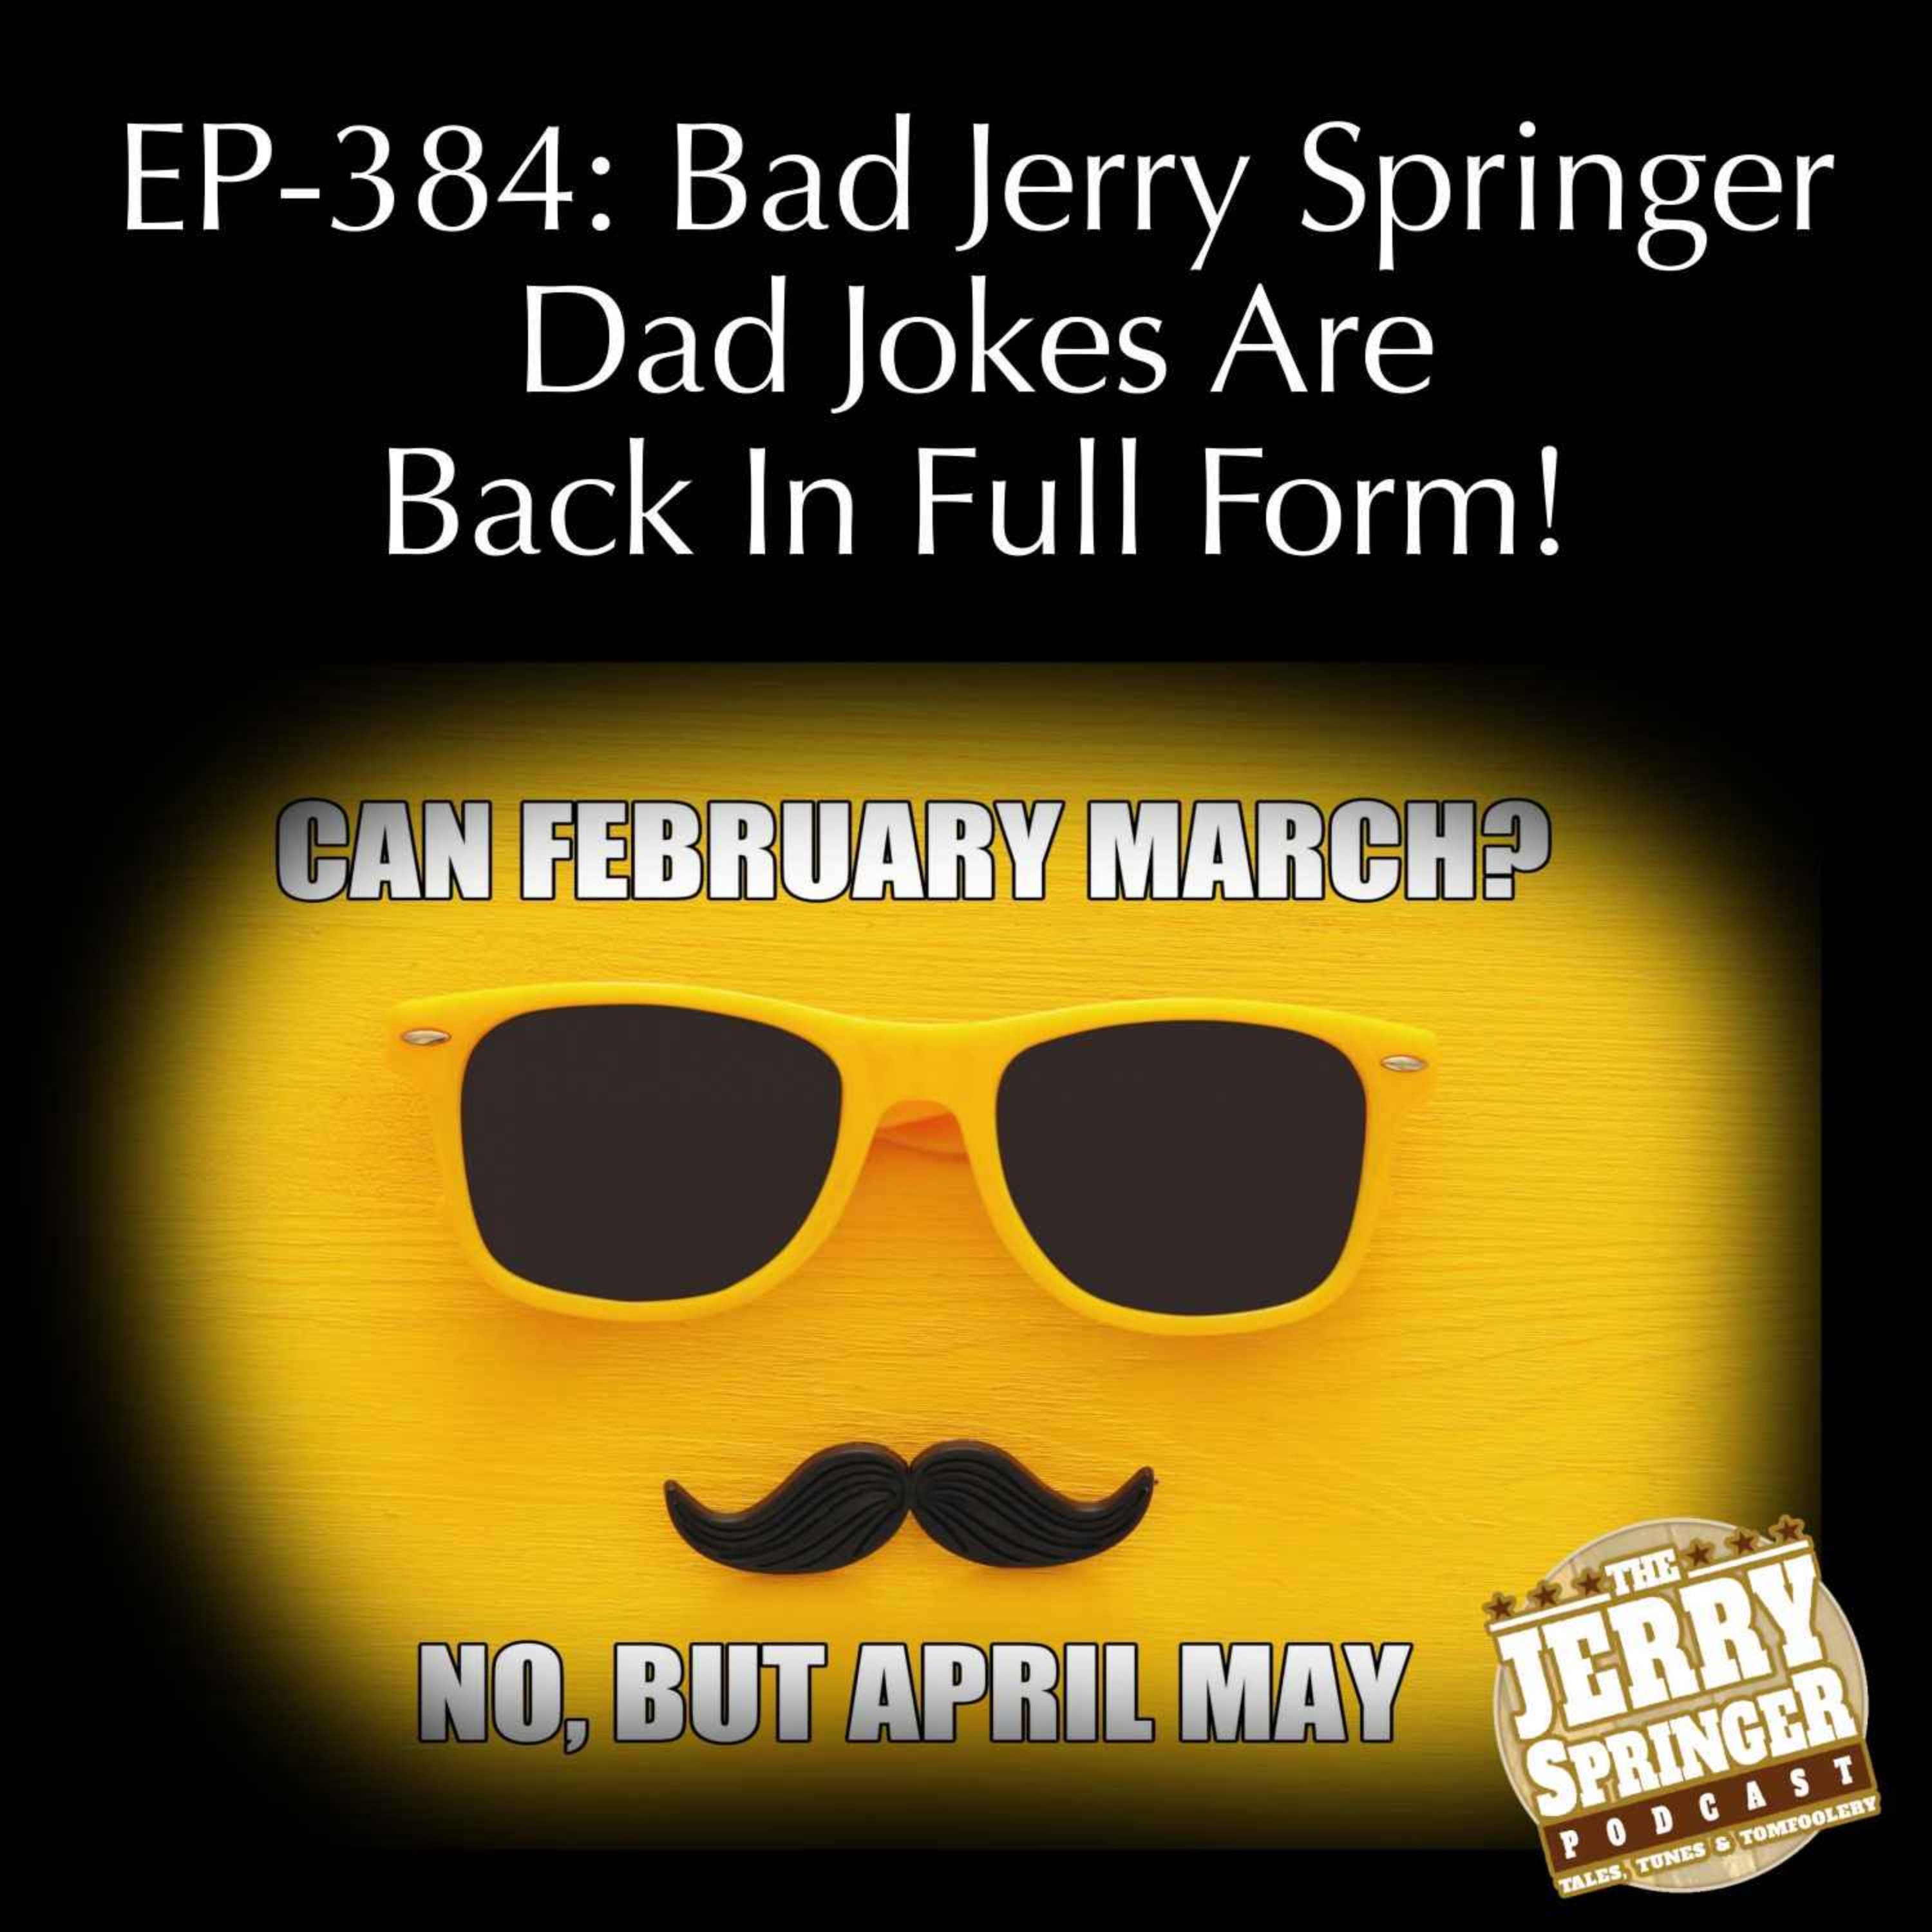 Bad Jerry Springer Dad Jokes Are Back In Full Form! EP - 384